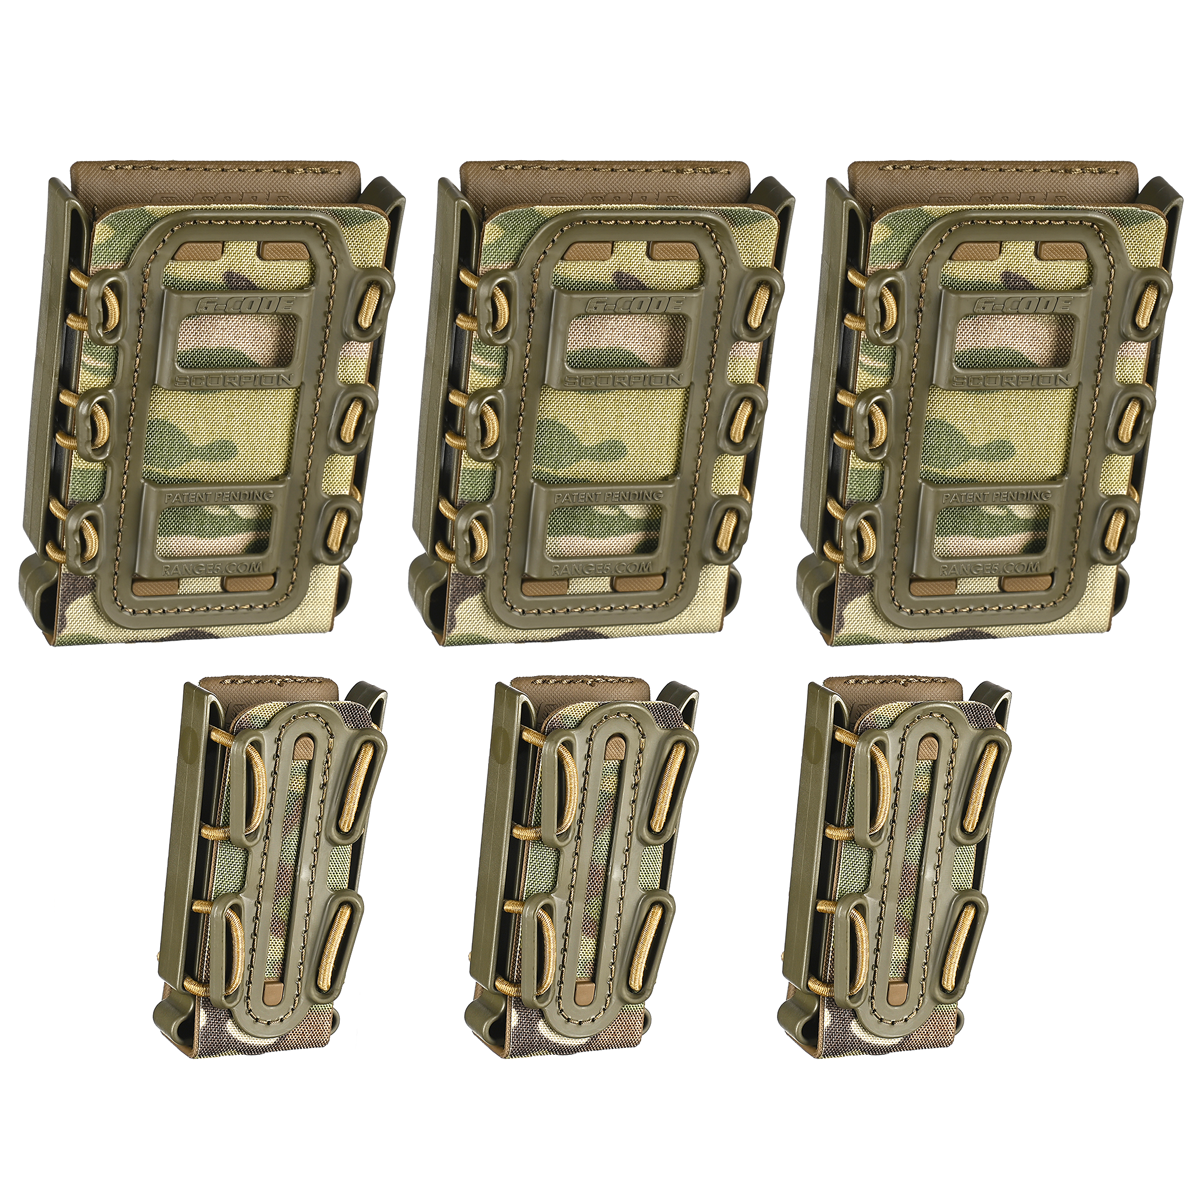 G-CODE P1 Molle Clips (with Hardware) 100% Made in USA